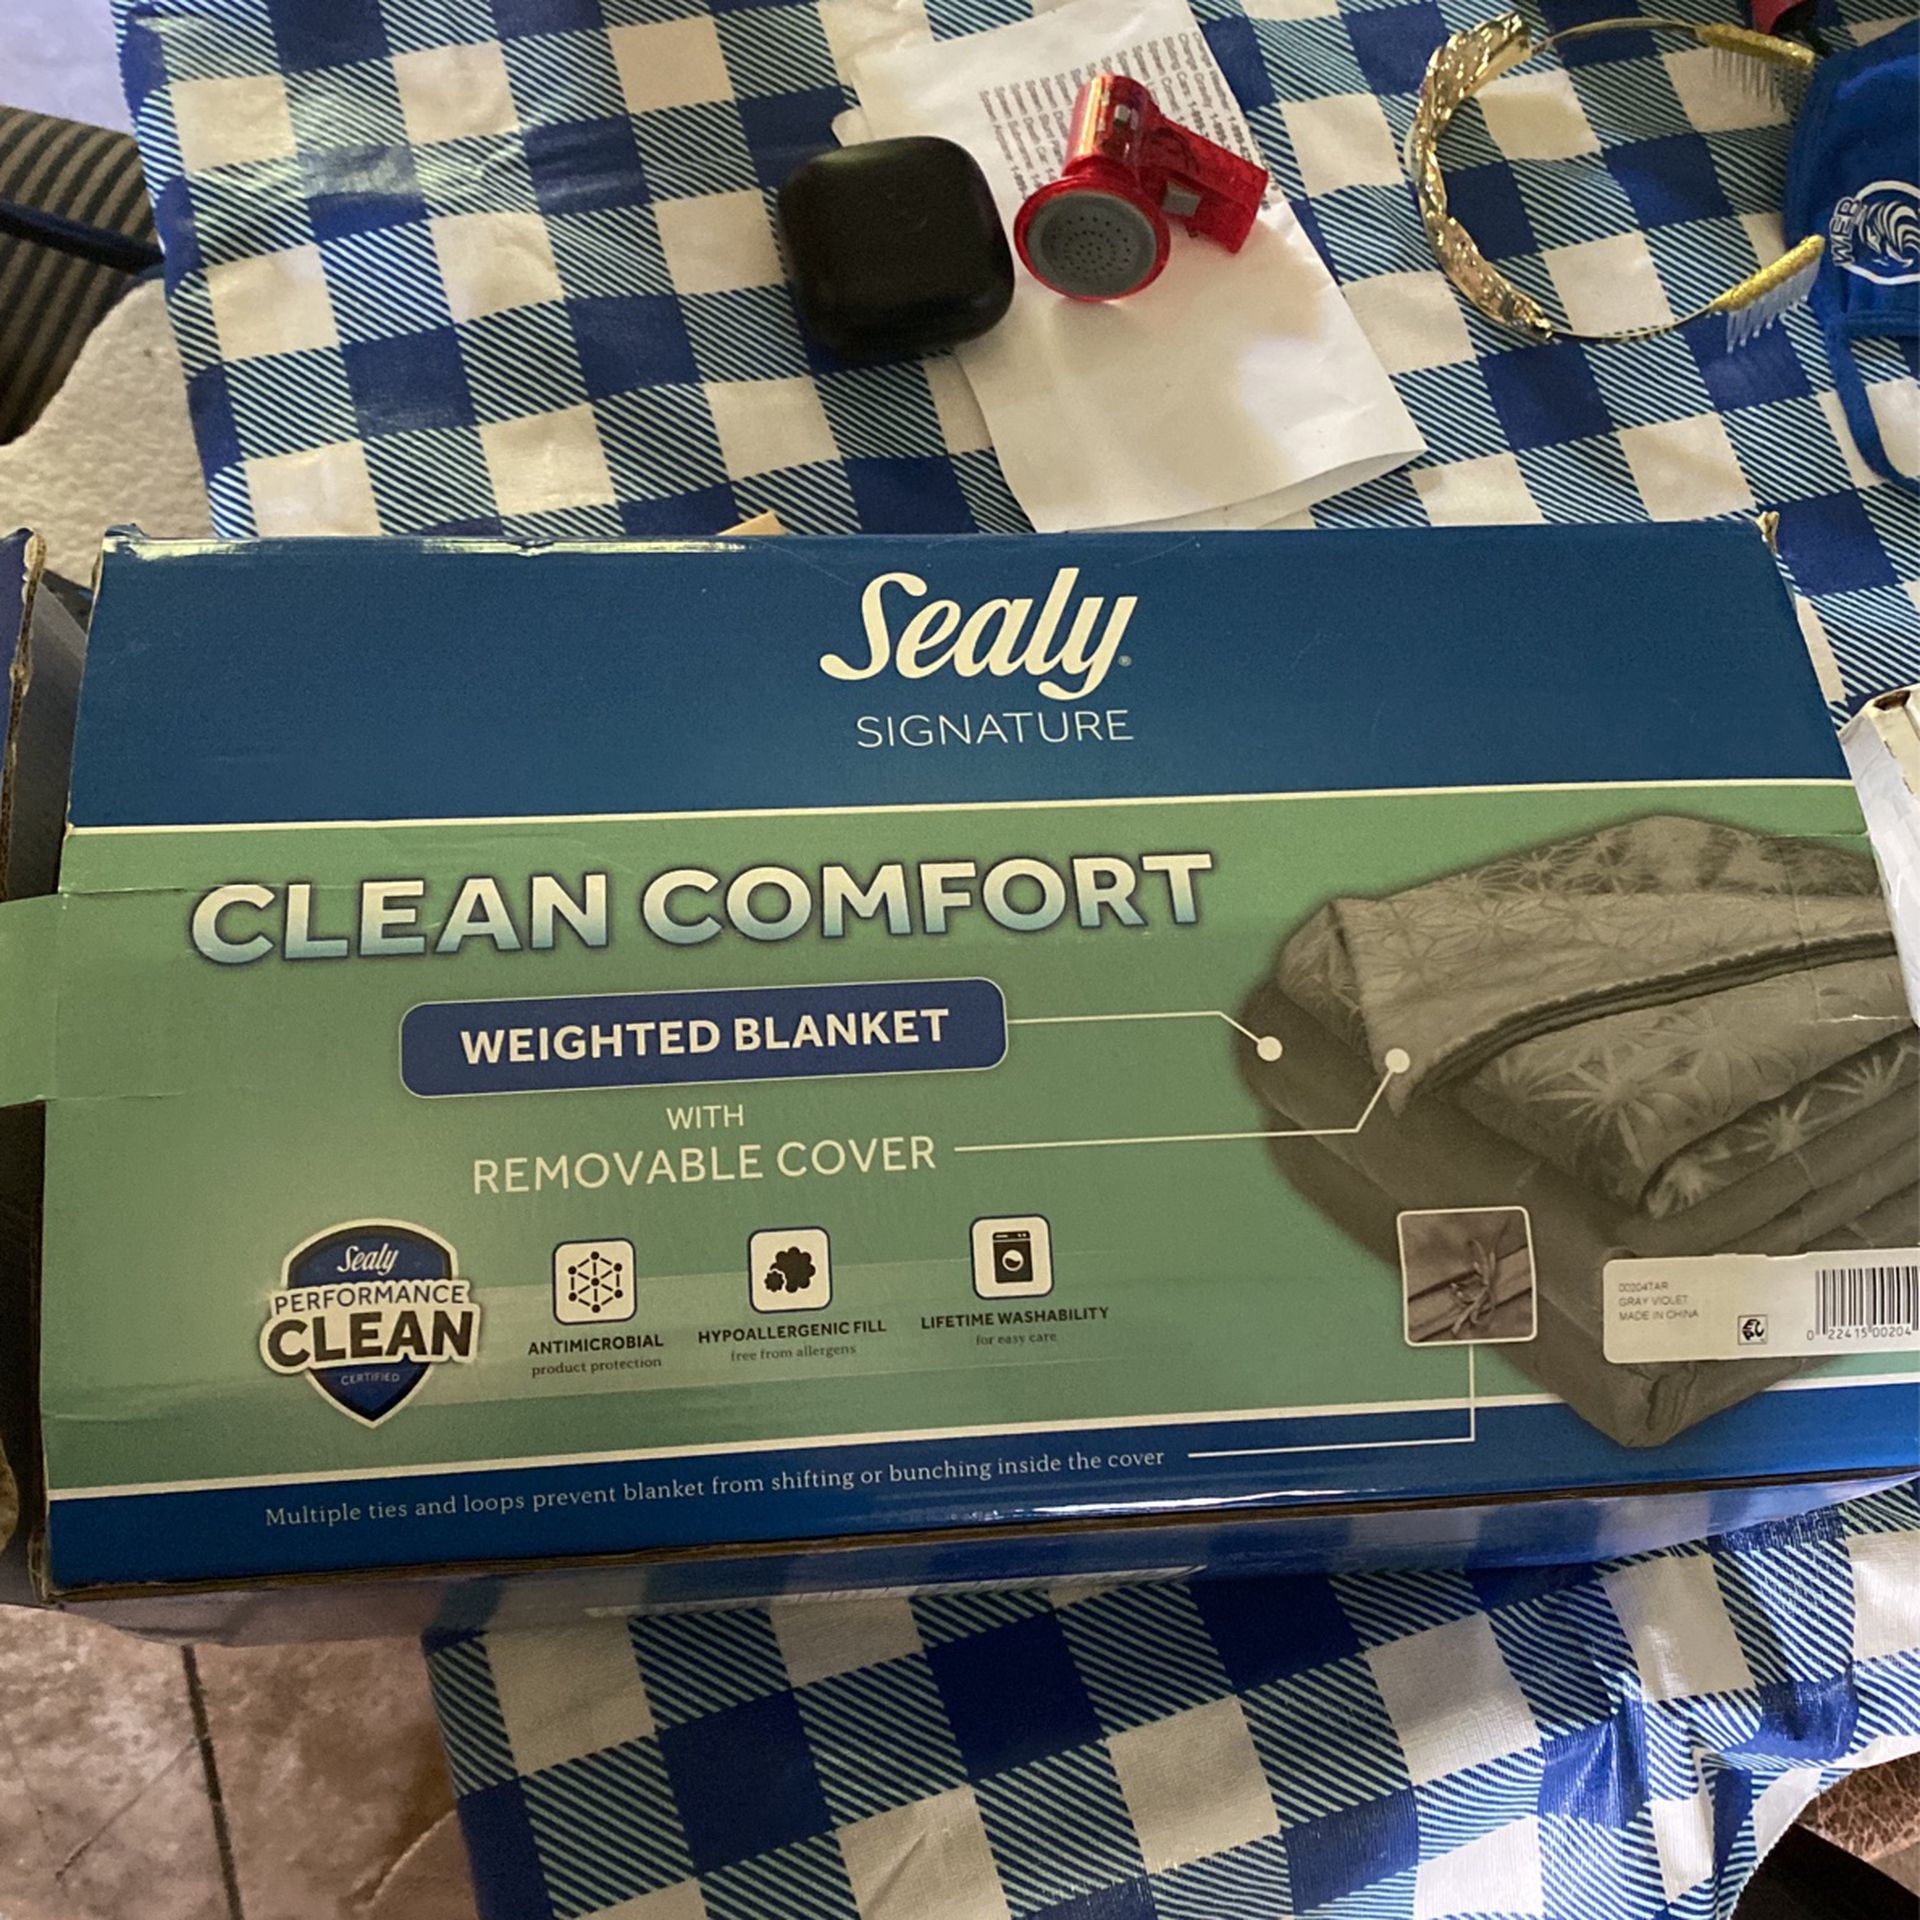 Sealy Clean Comfort